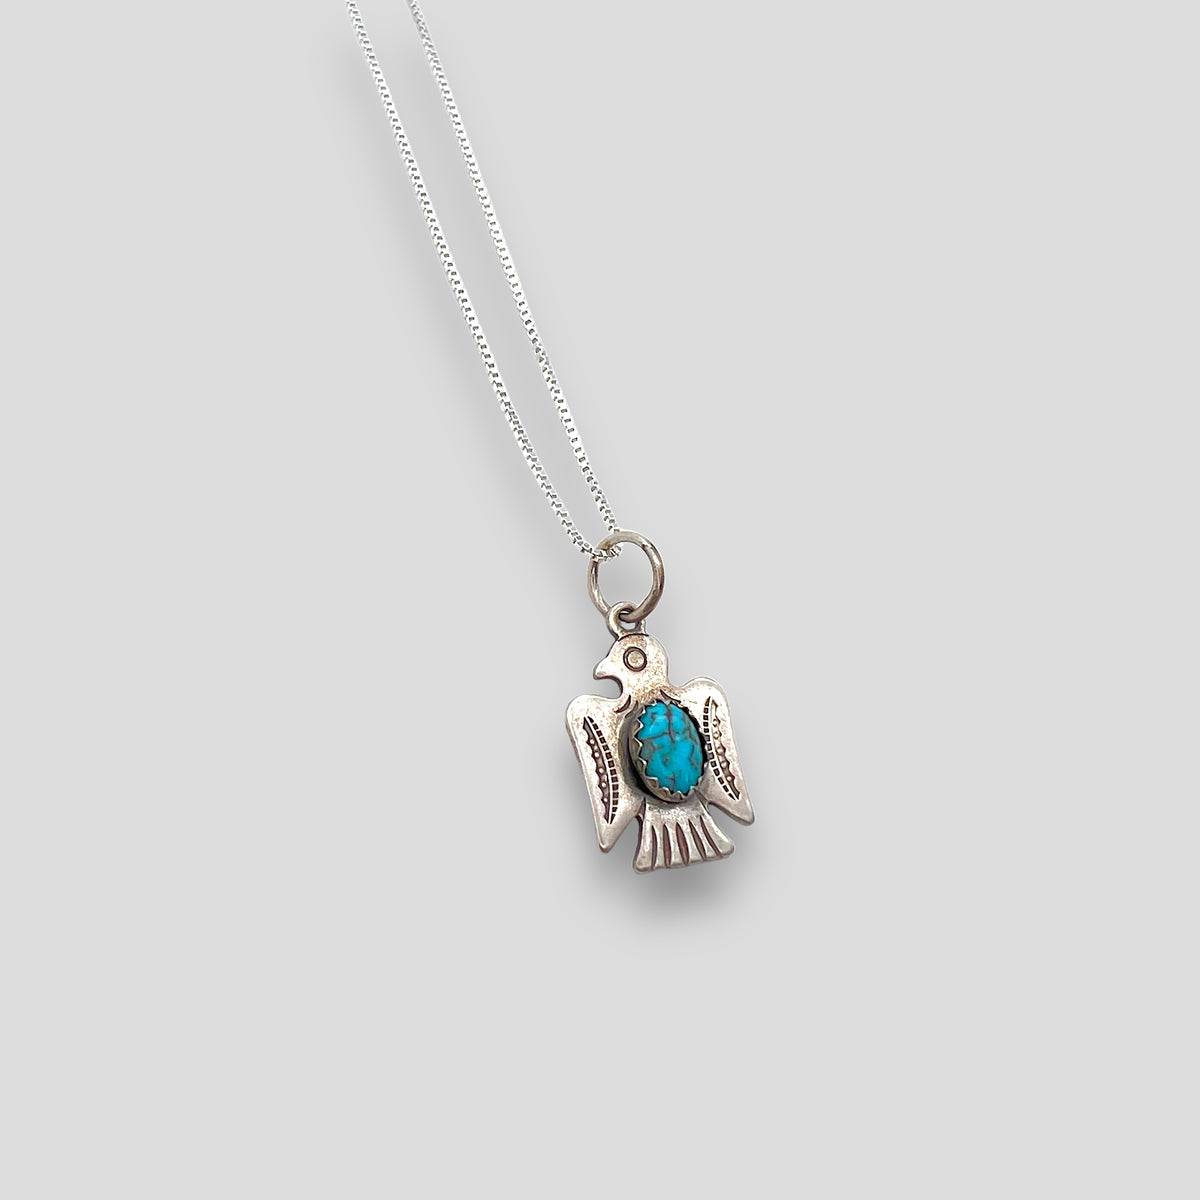 Small Turquoise and Sterling Silver Thunderbird Pendant Necklace